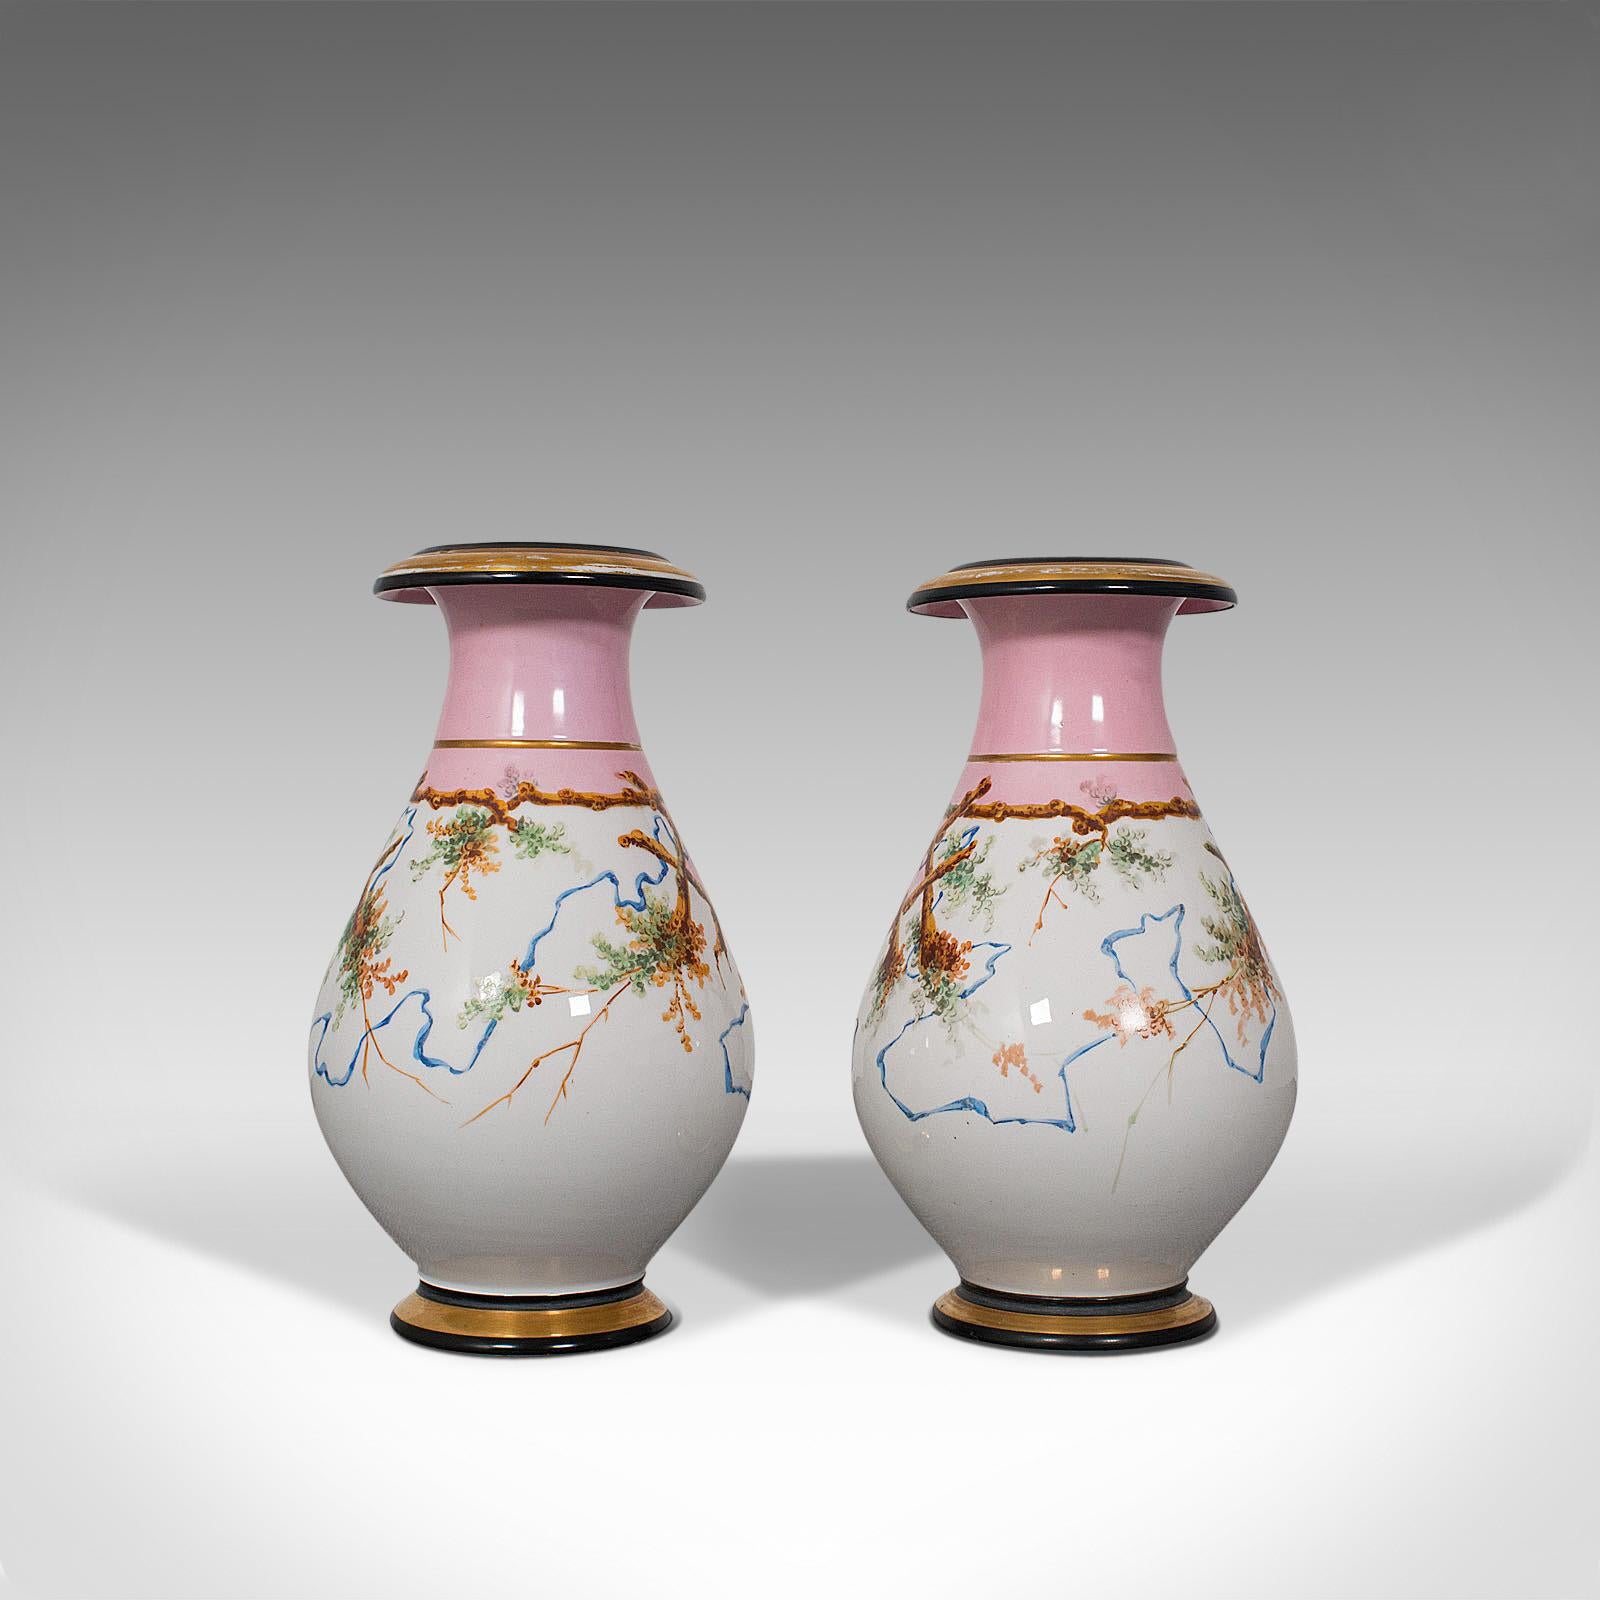 19th Century Antique Pair of Peony Vases, French, Decorative Ceramic Urn, Victorian For Sale